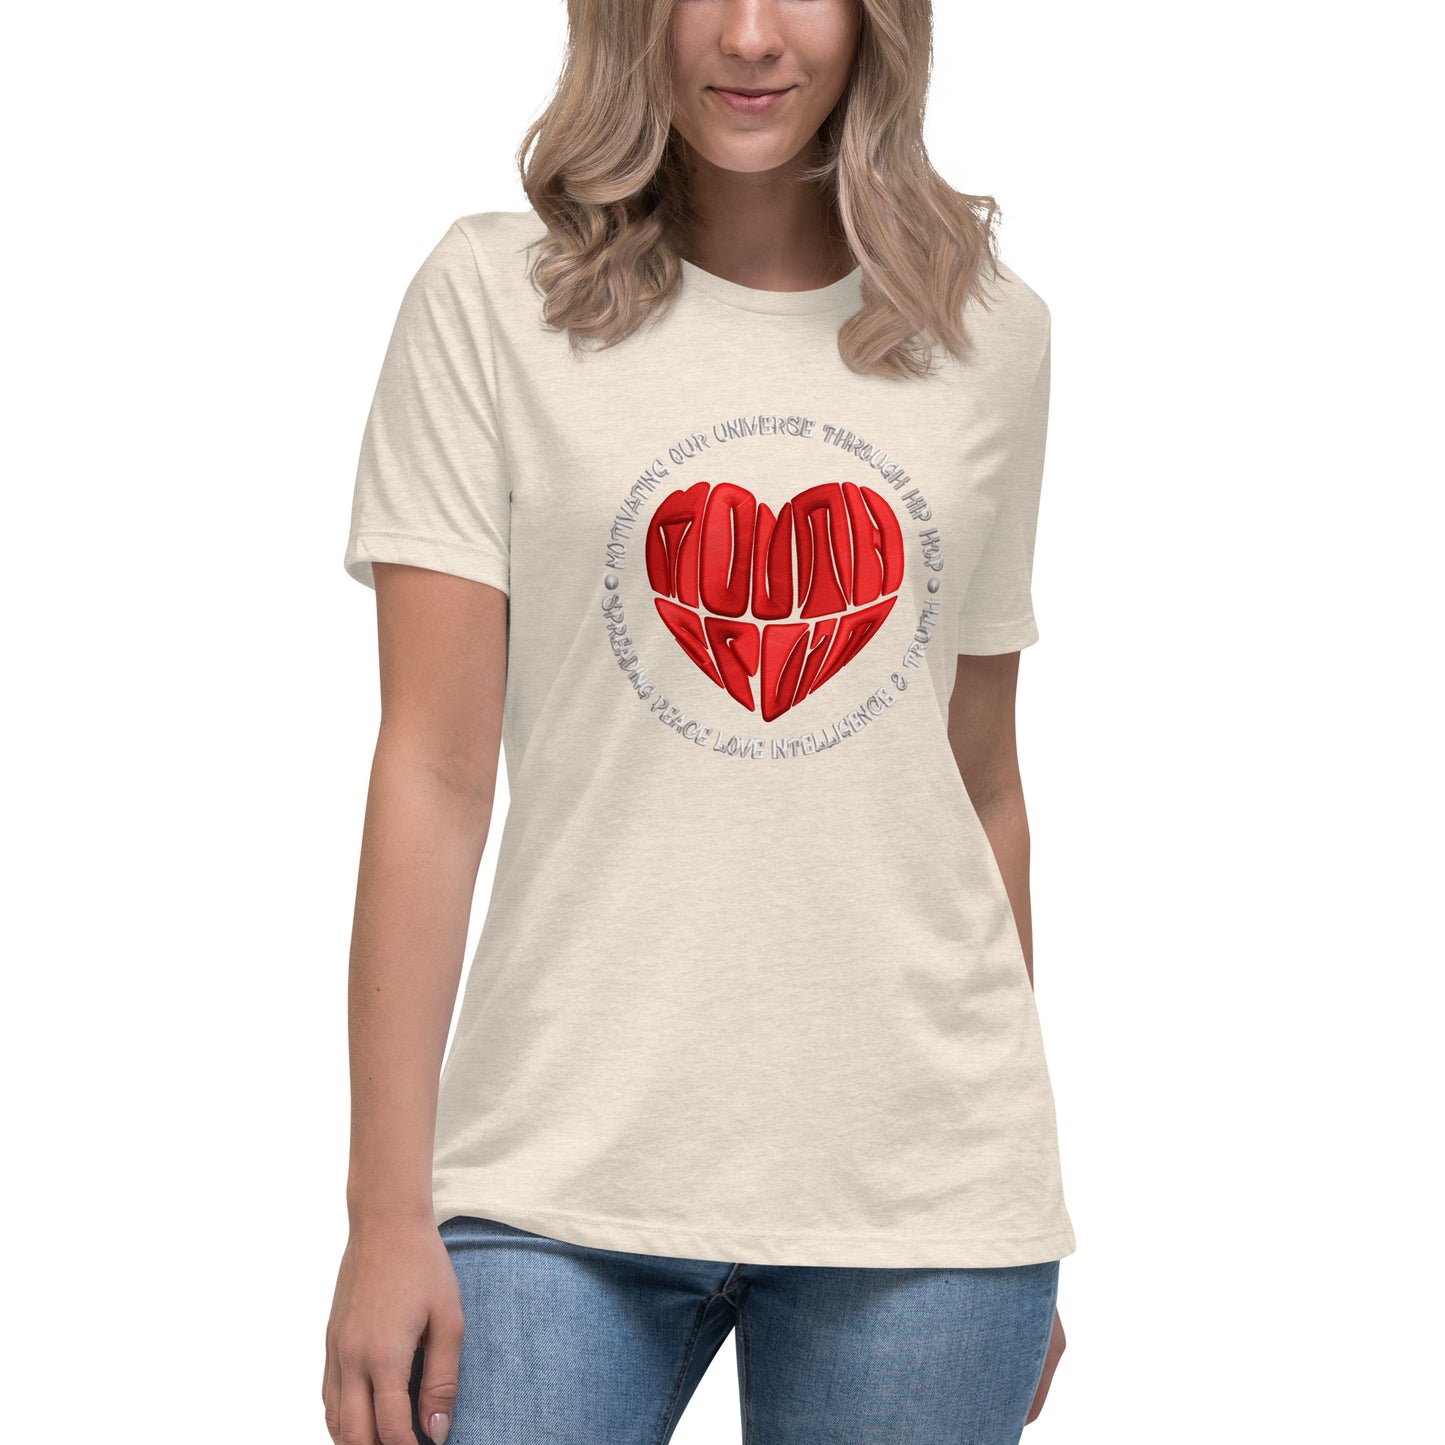 MS Love With Meaning Women's Relaxed T-Shirt